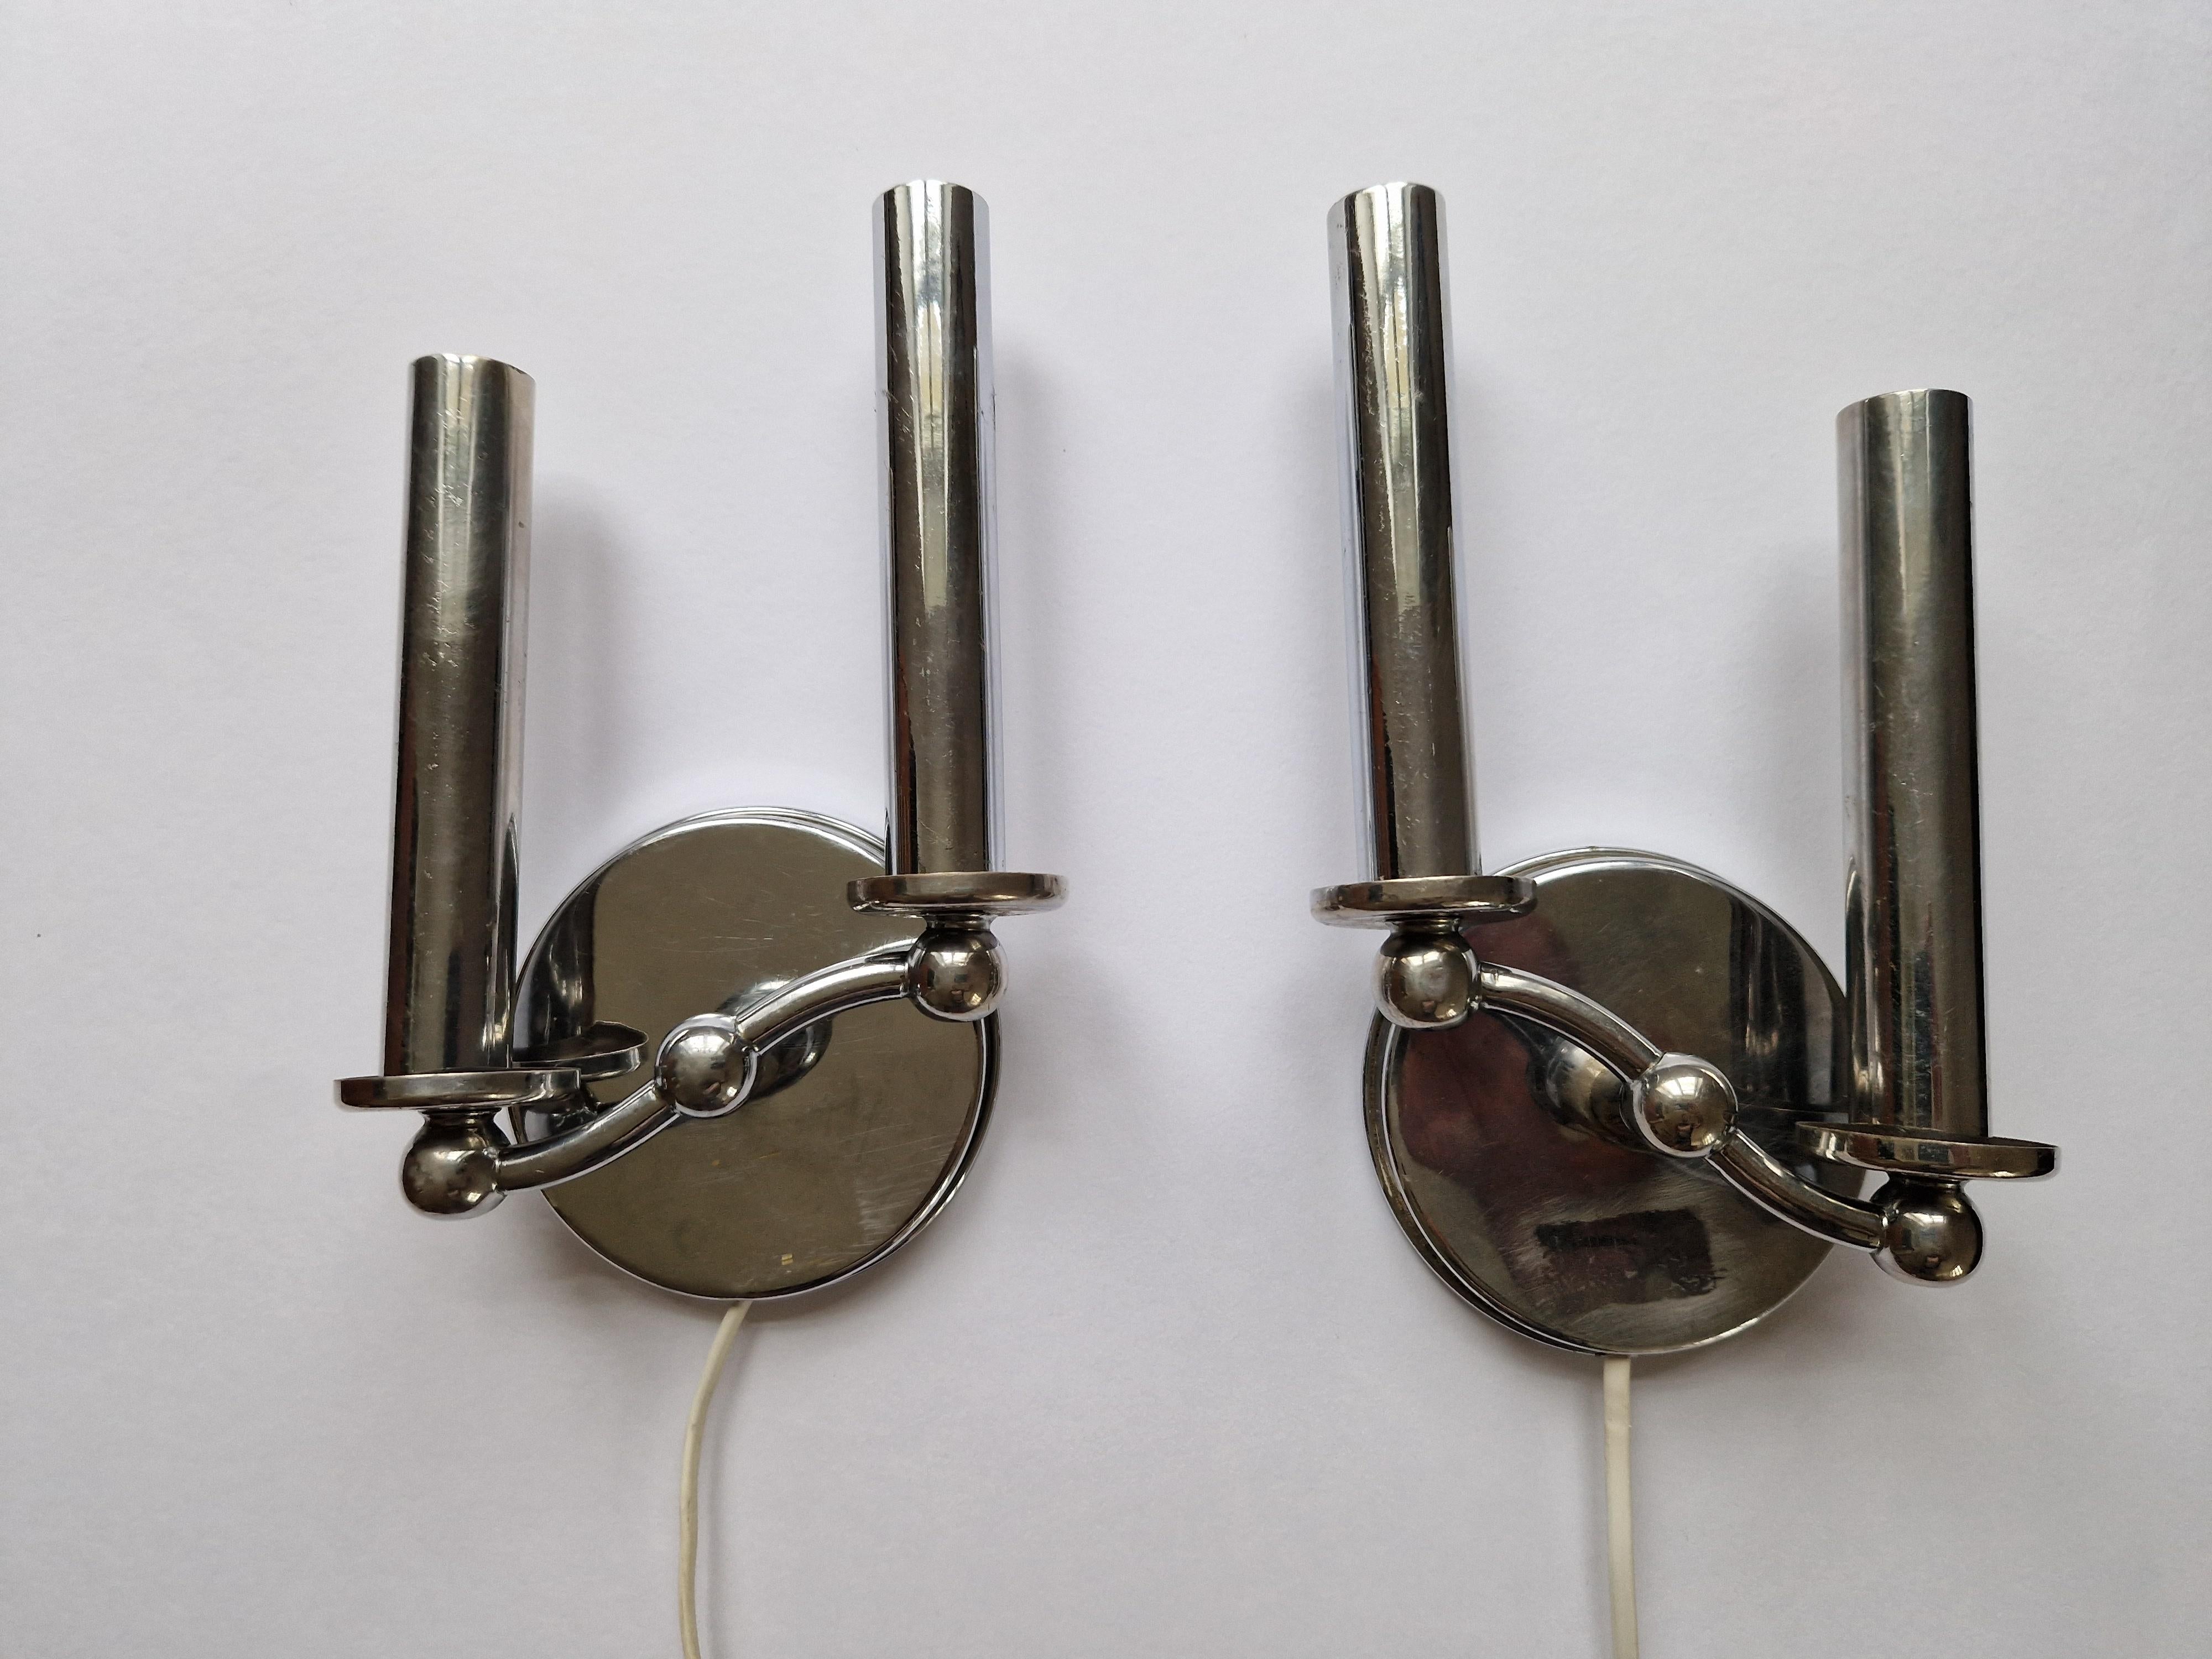 Pair of Rare Chrome Art Deco / Functionalism Wall Lamps, 1930s For Sale 2